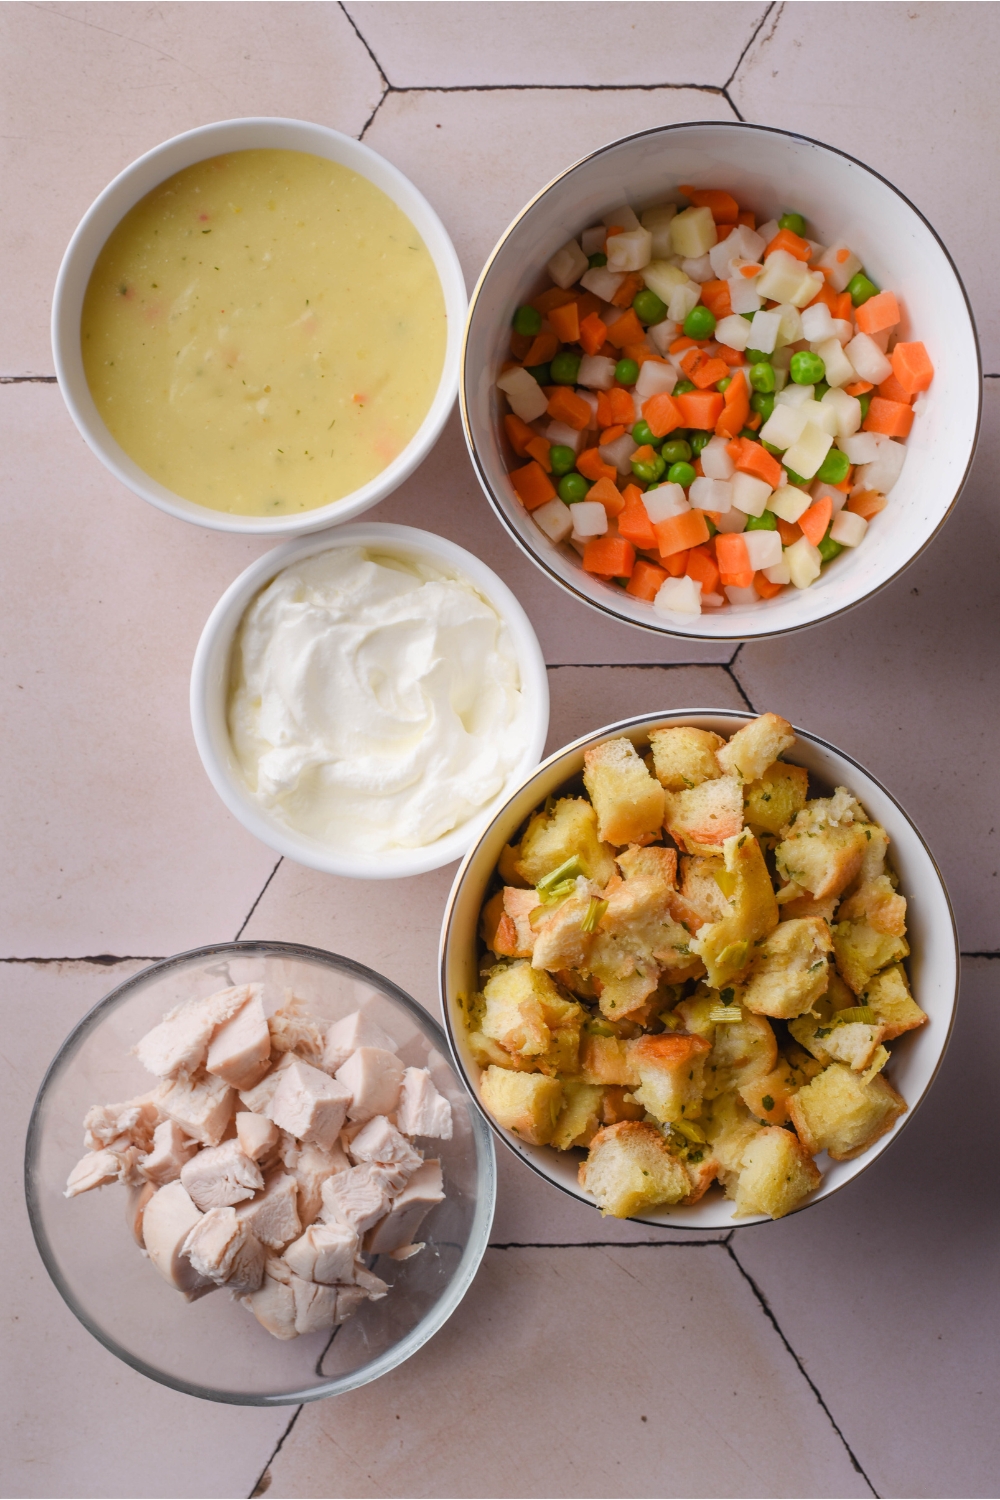 An assortment of ingredients including bowls of diced vegetables, cream of chicken soup, sour cream, cooked stuffing, and diced chicken.